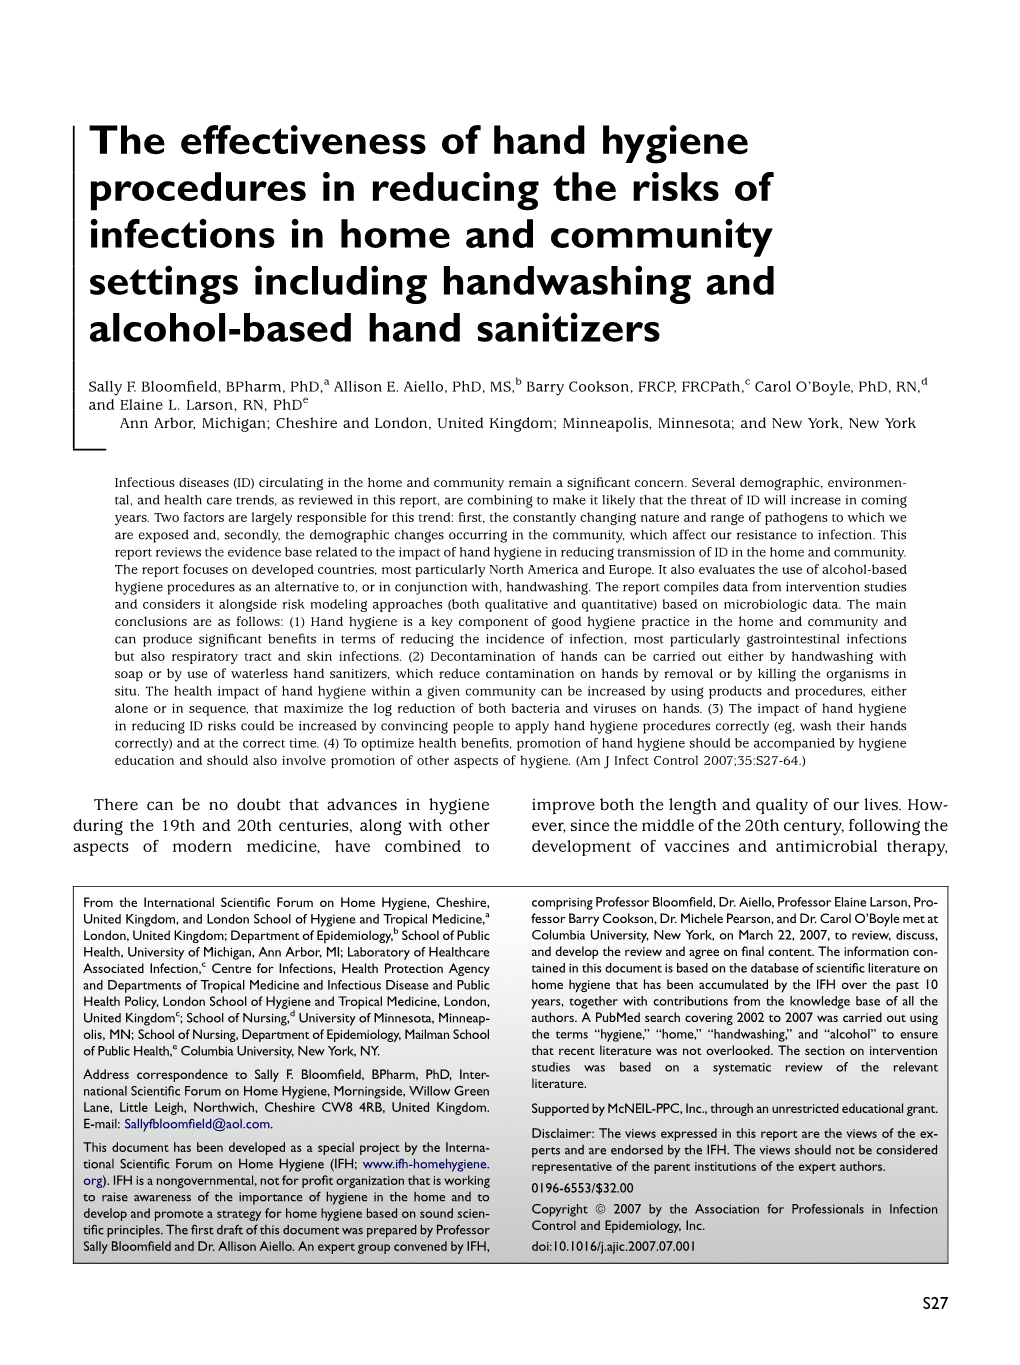 The Effectiveness of Hand Hygiene Procedures in Reducing the Risks of Infections in Home and Community Settings Including Handwa